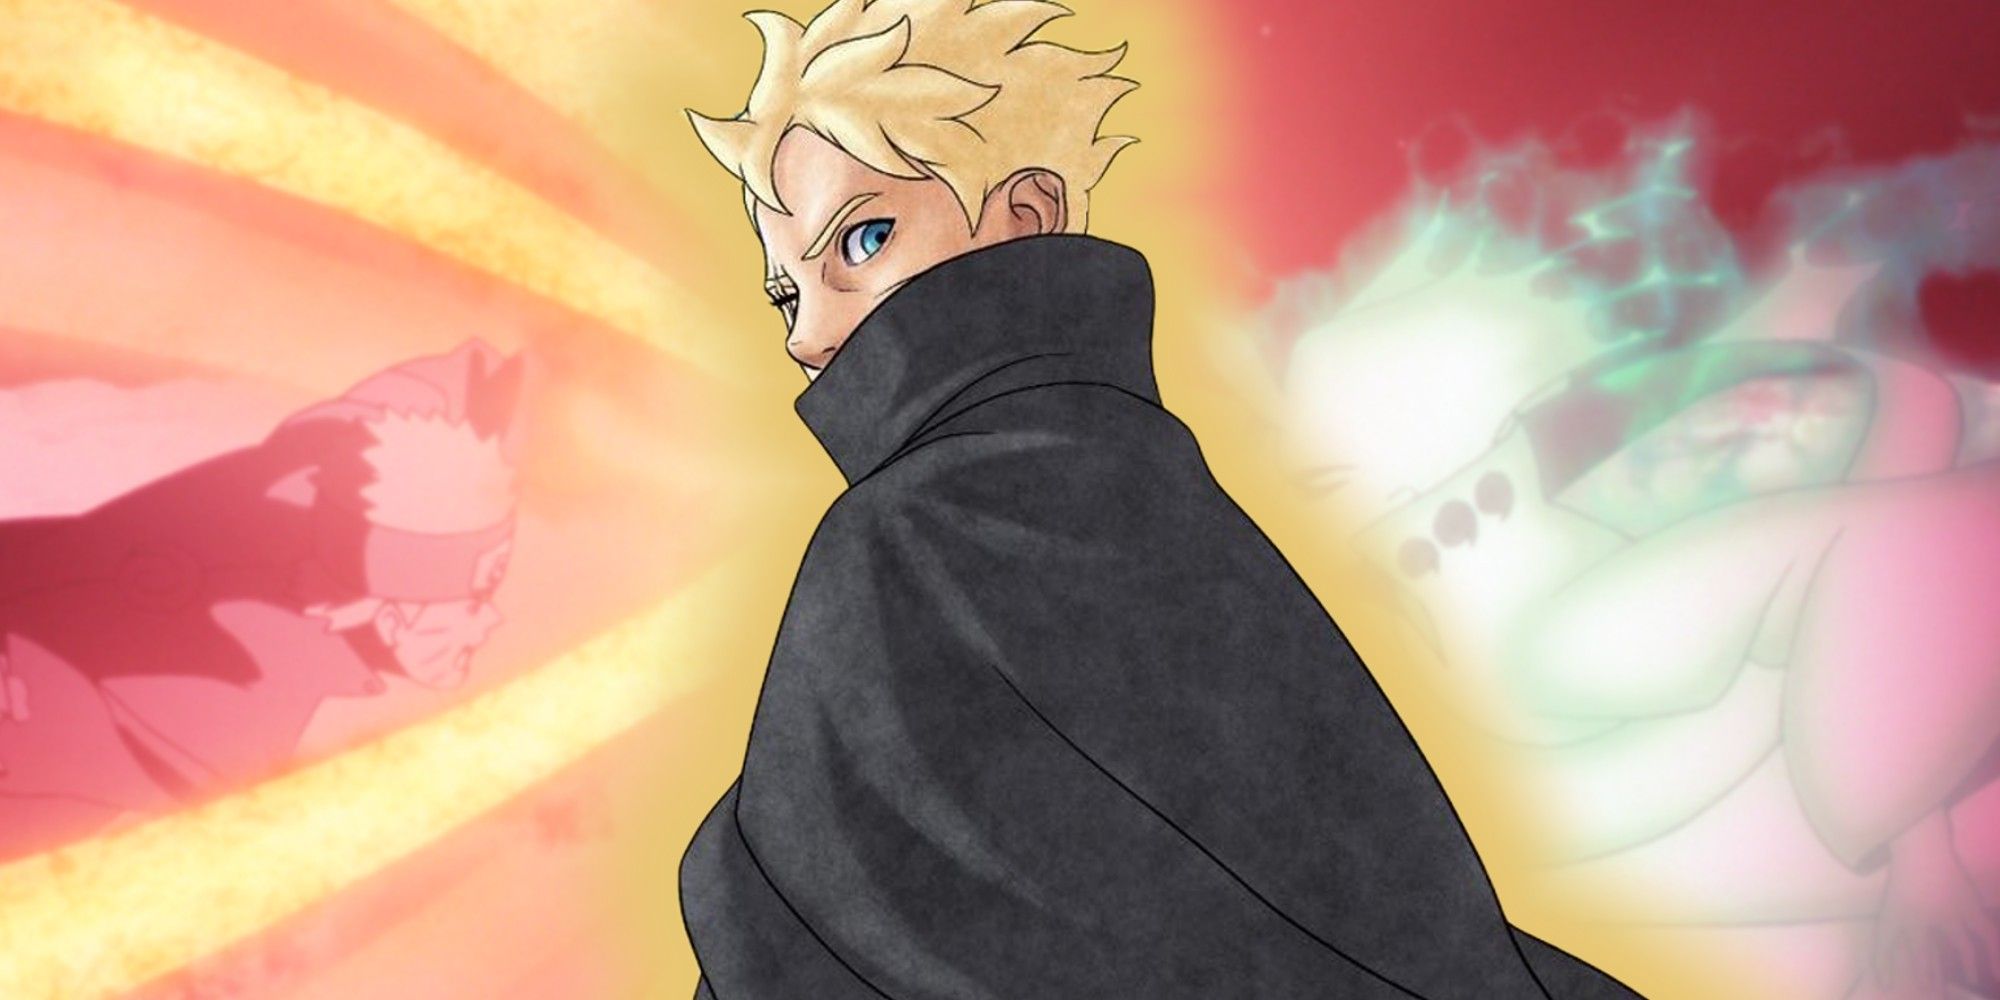 Image of Boruto looking back in front Toneri and Naruto fighting